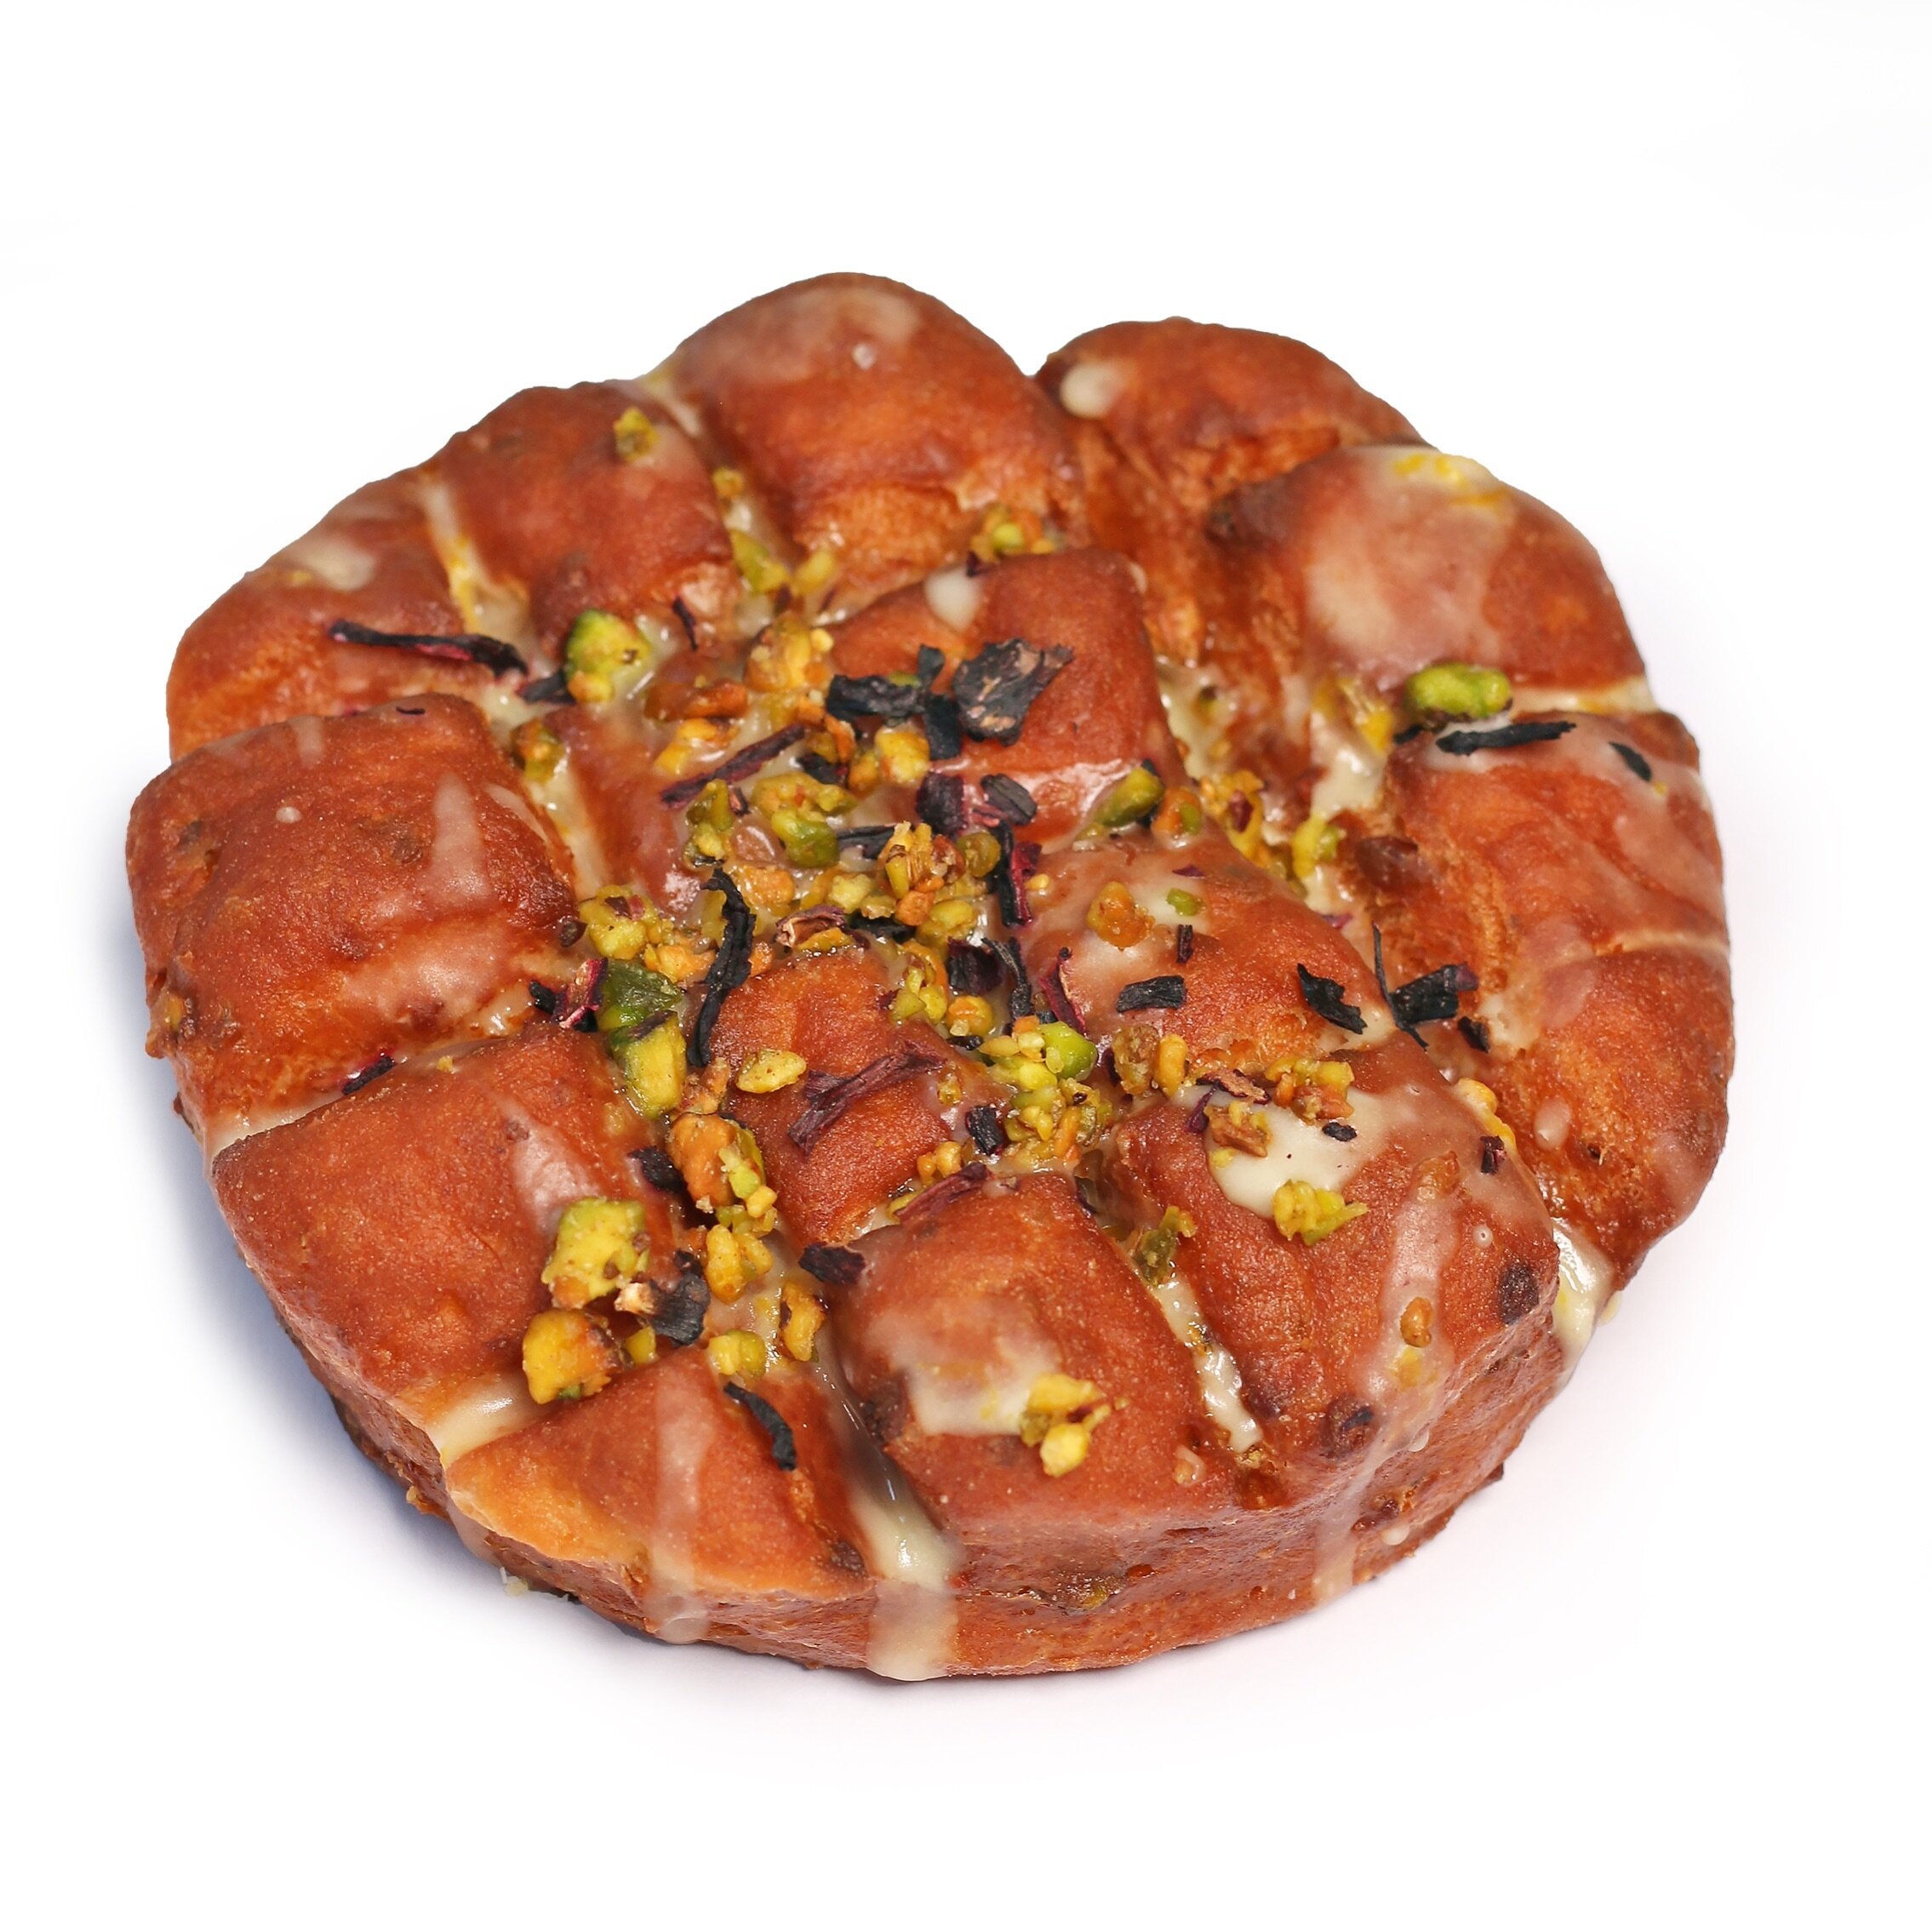 Roxy Fritters to start off the Persian New Year! 

Saffron &amp; pistachio dough drizzles with a cardamom-rose water glaze and sprinkled with pistachios and hibiscus petals. 

These will be available today and tomorrow!